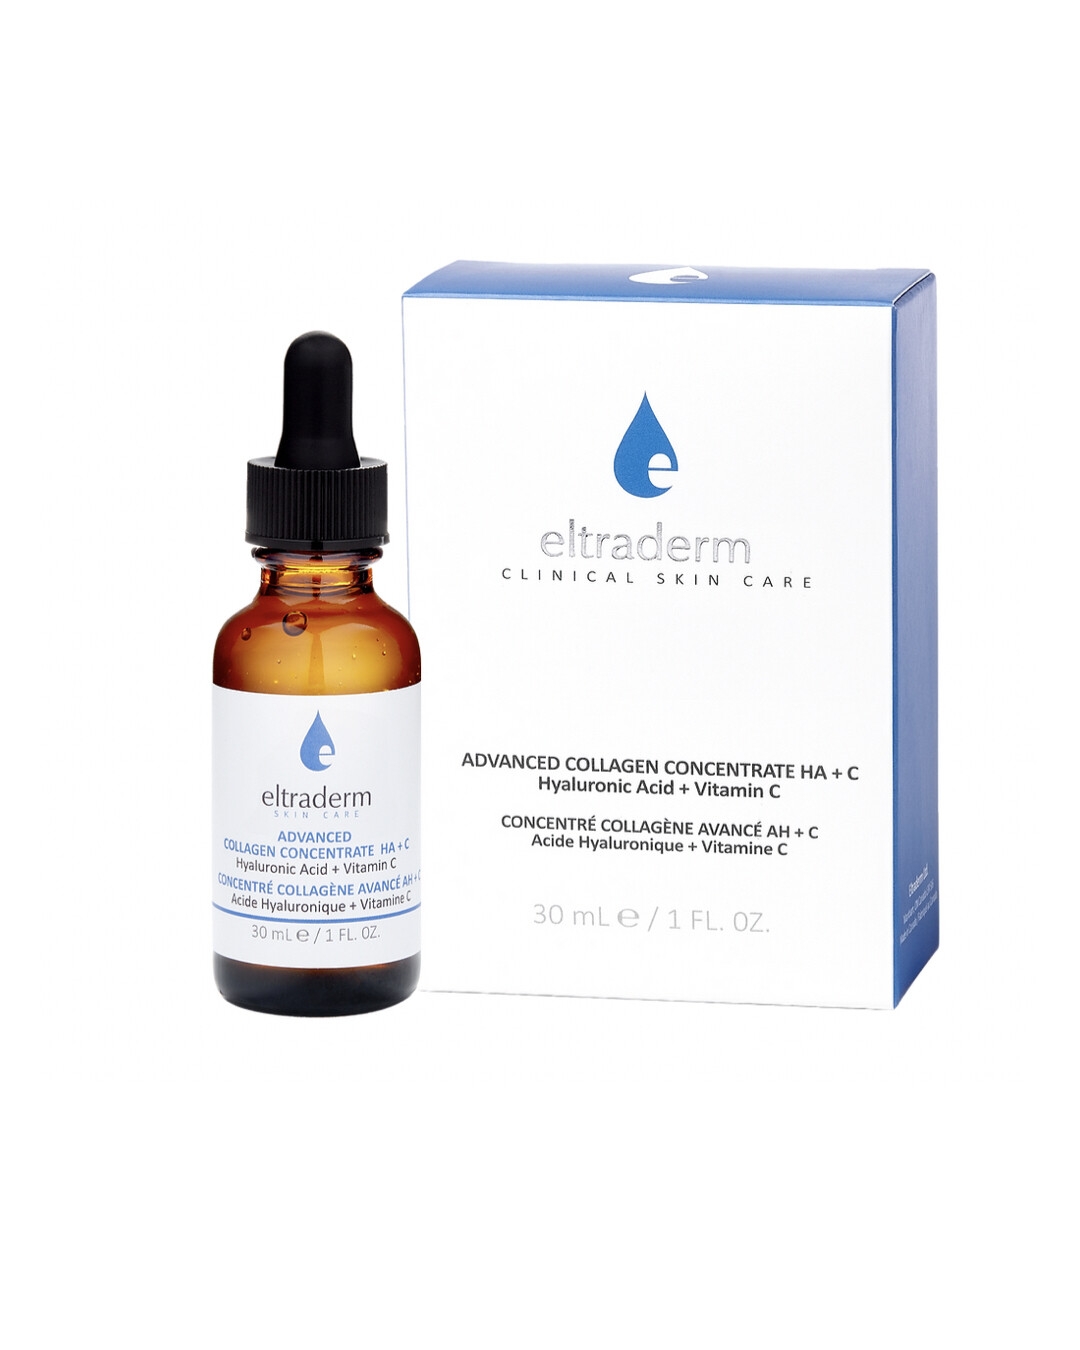 Clinical Advanced Collagen Concentrate HA + C Serum